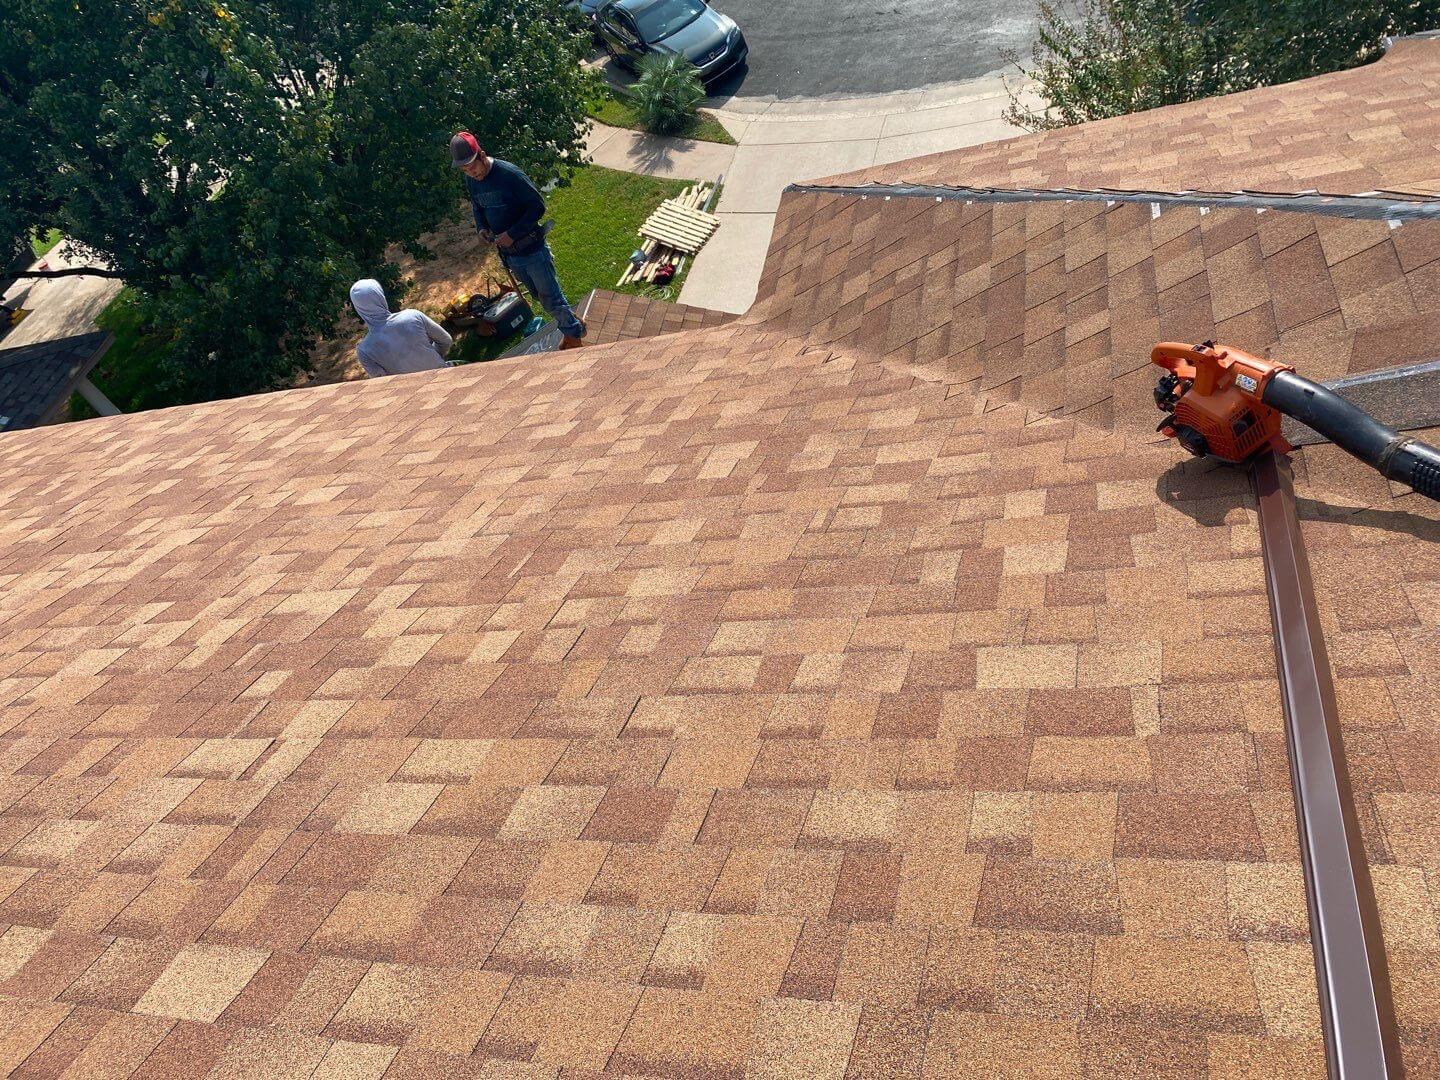 A roof inspection can protect your home